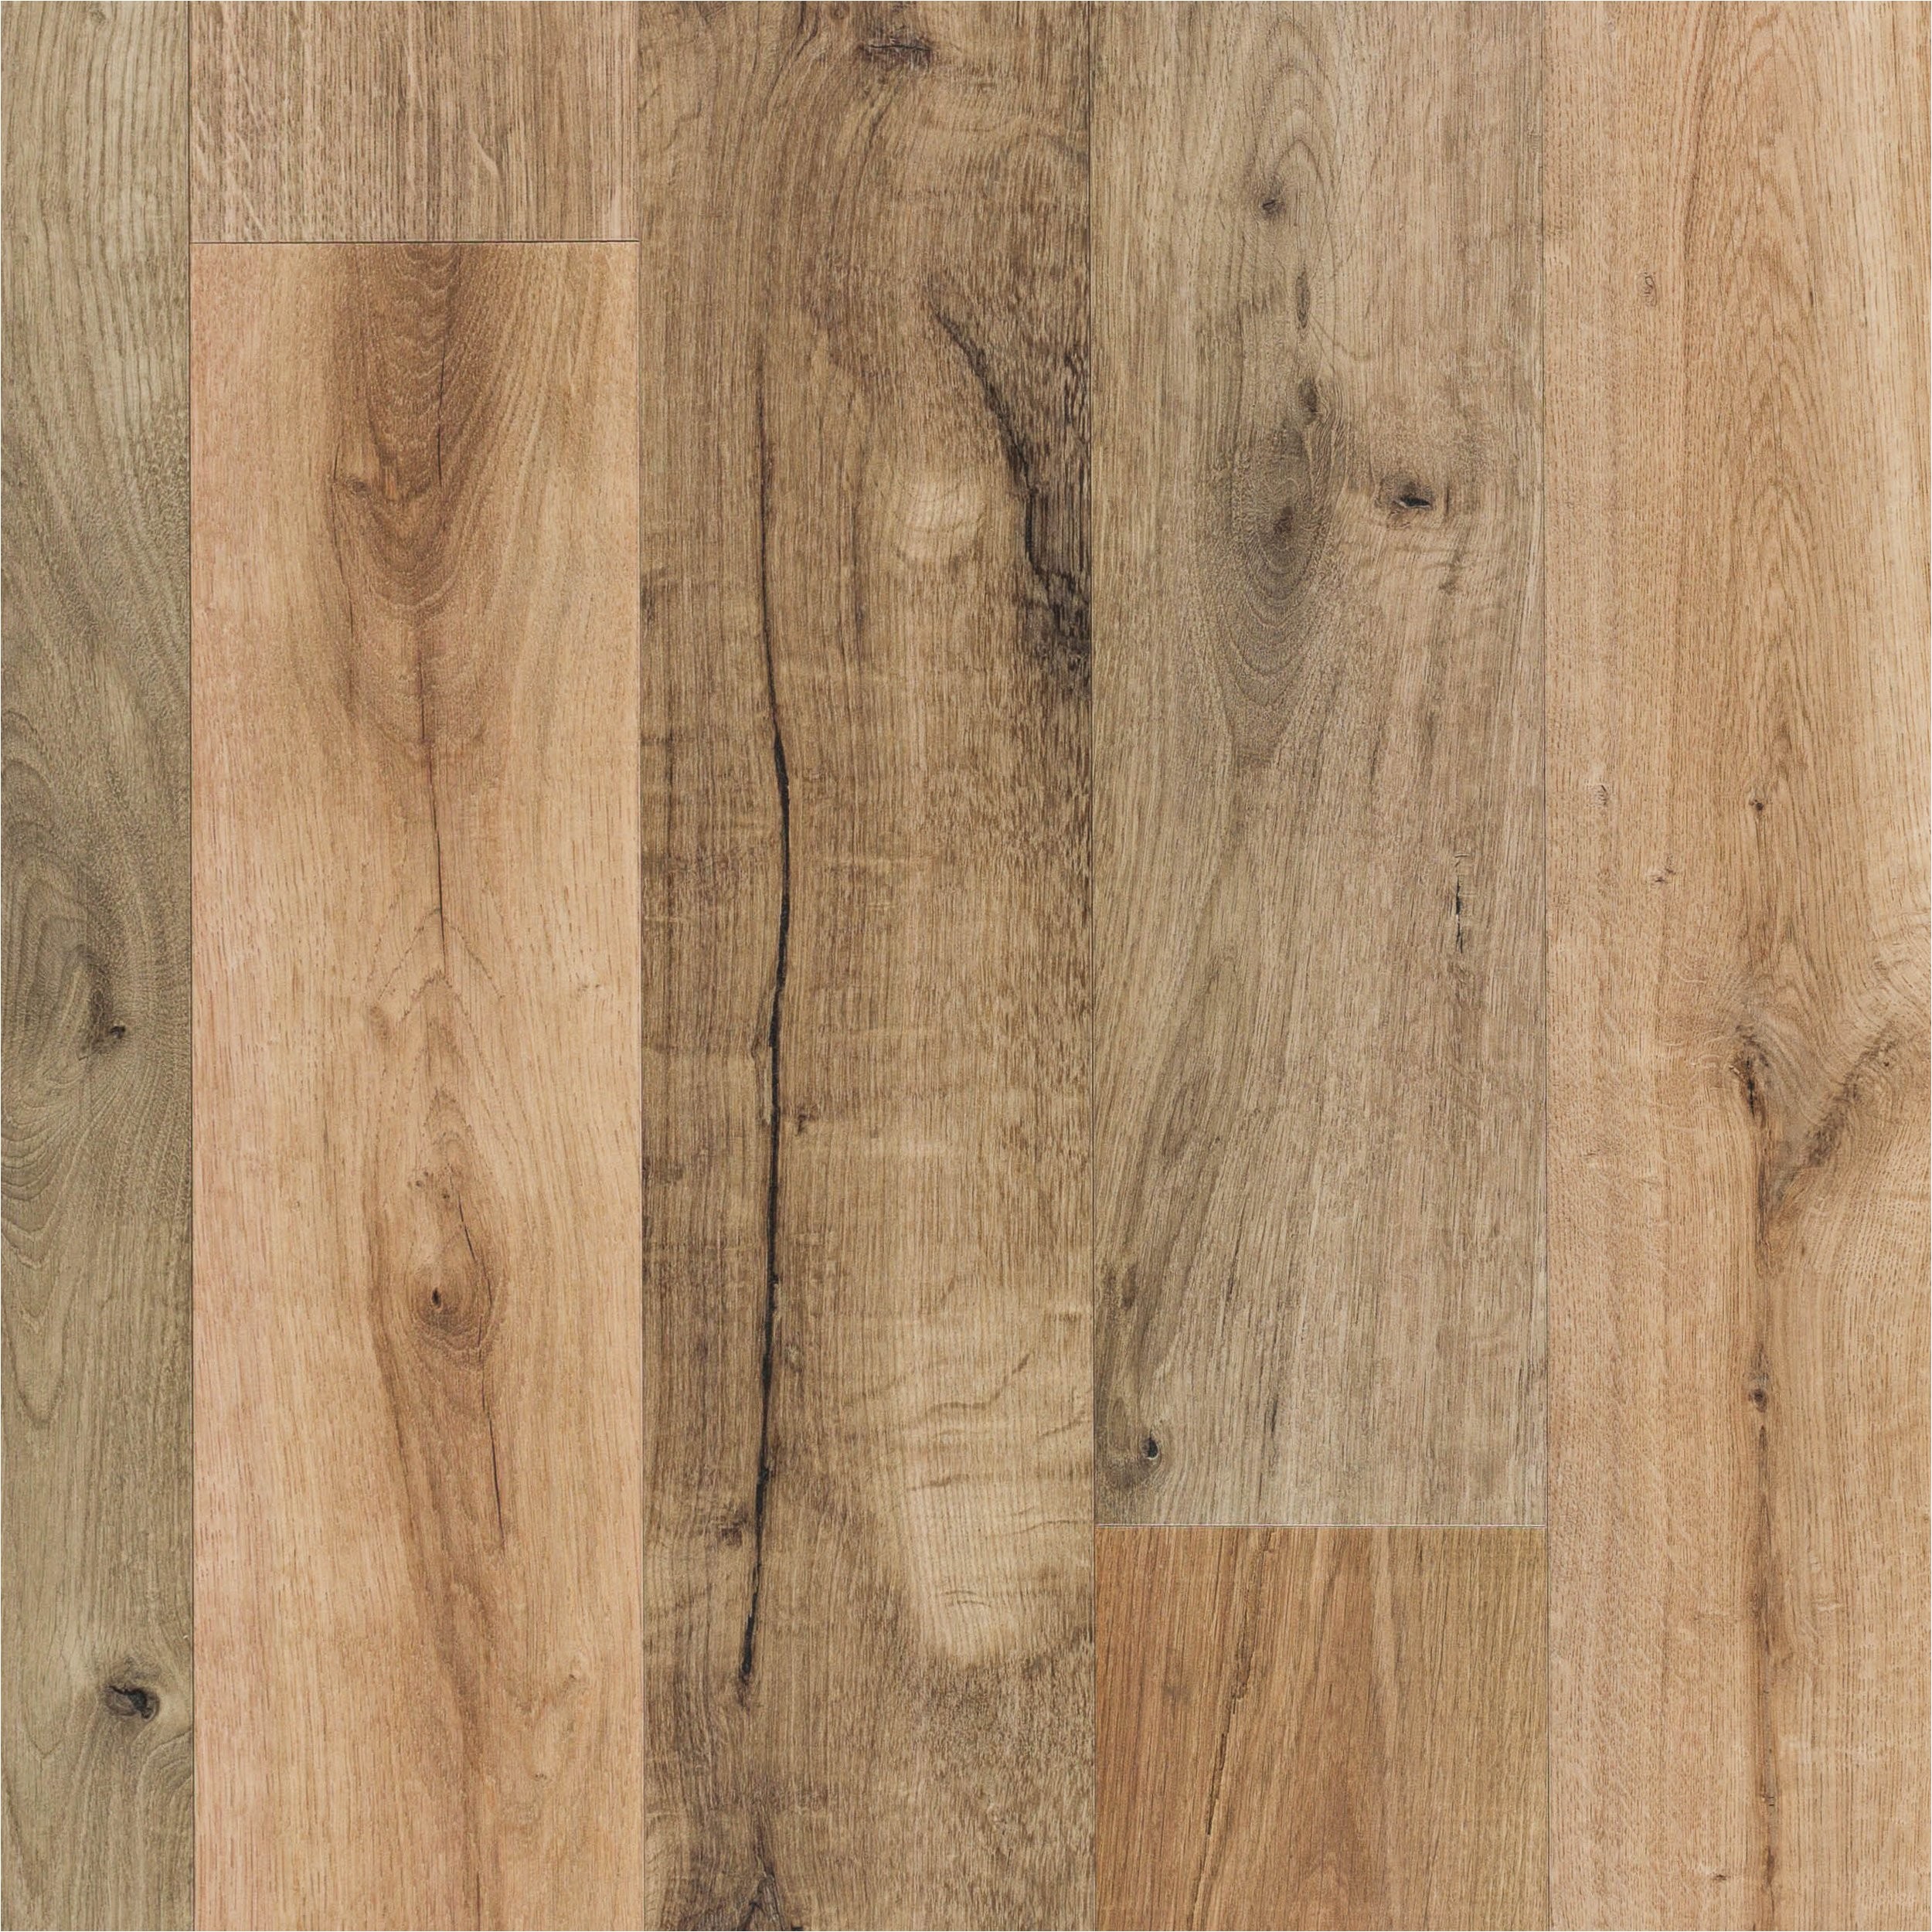 Sea island Oak Laminate Sea island Oak Laminate 12mm 100287762 Floor and Decor